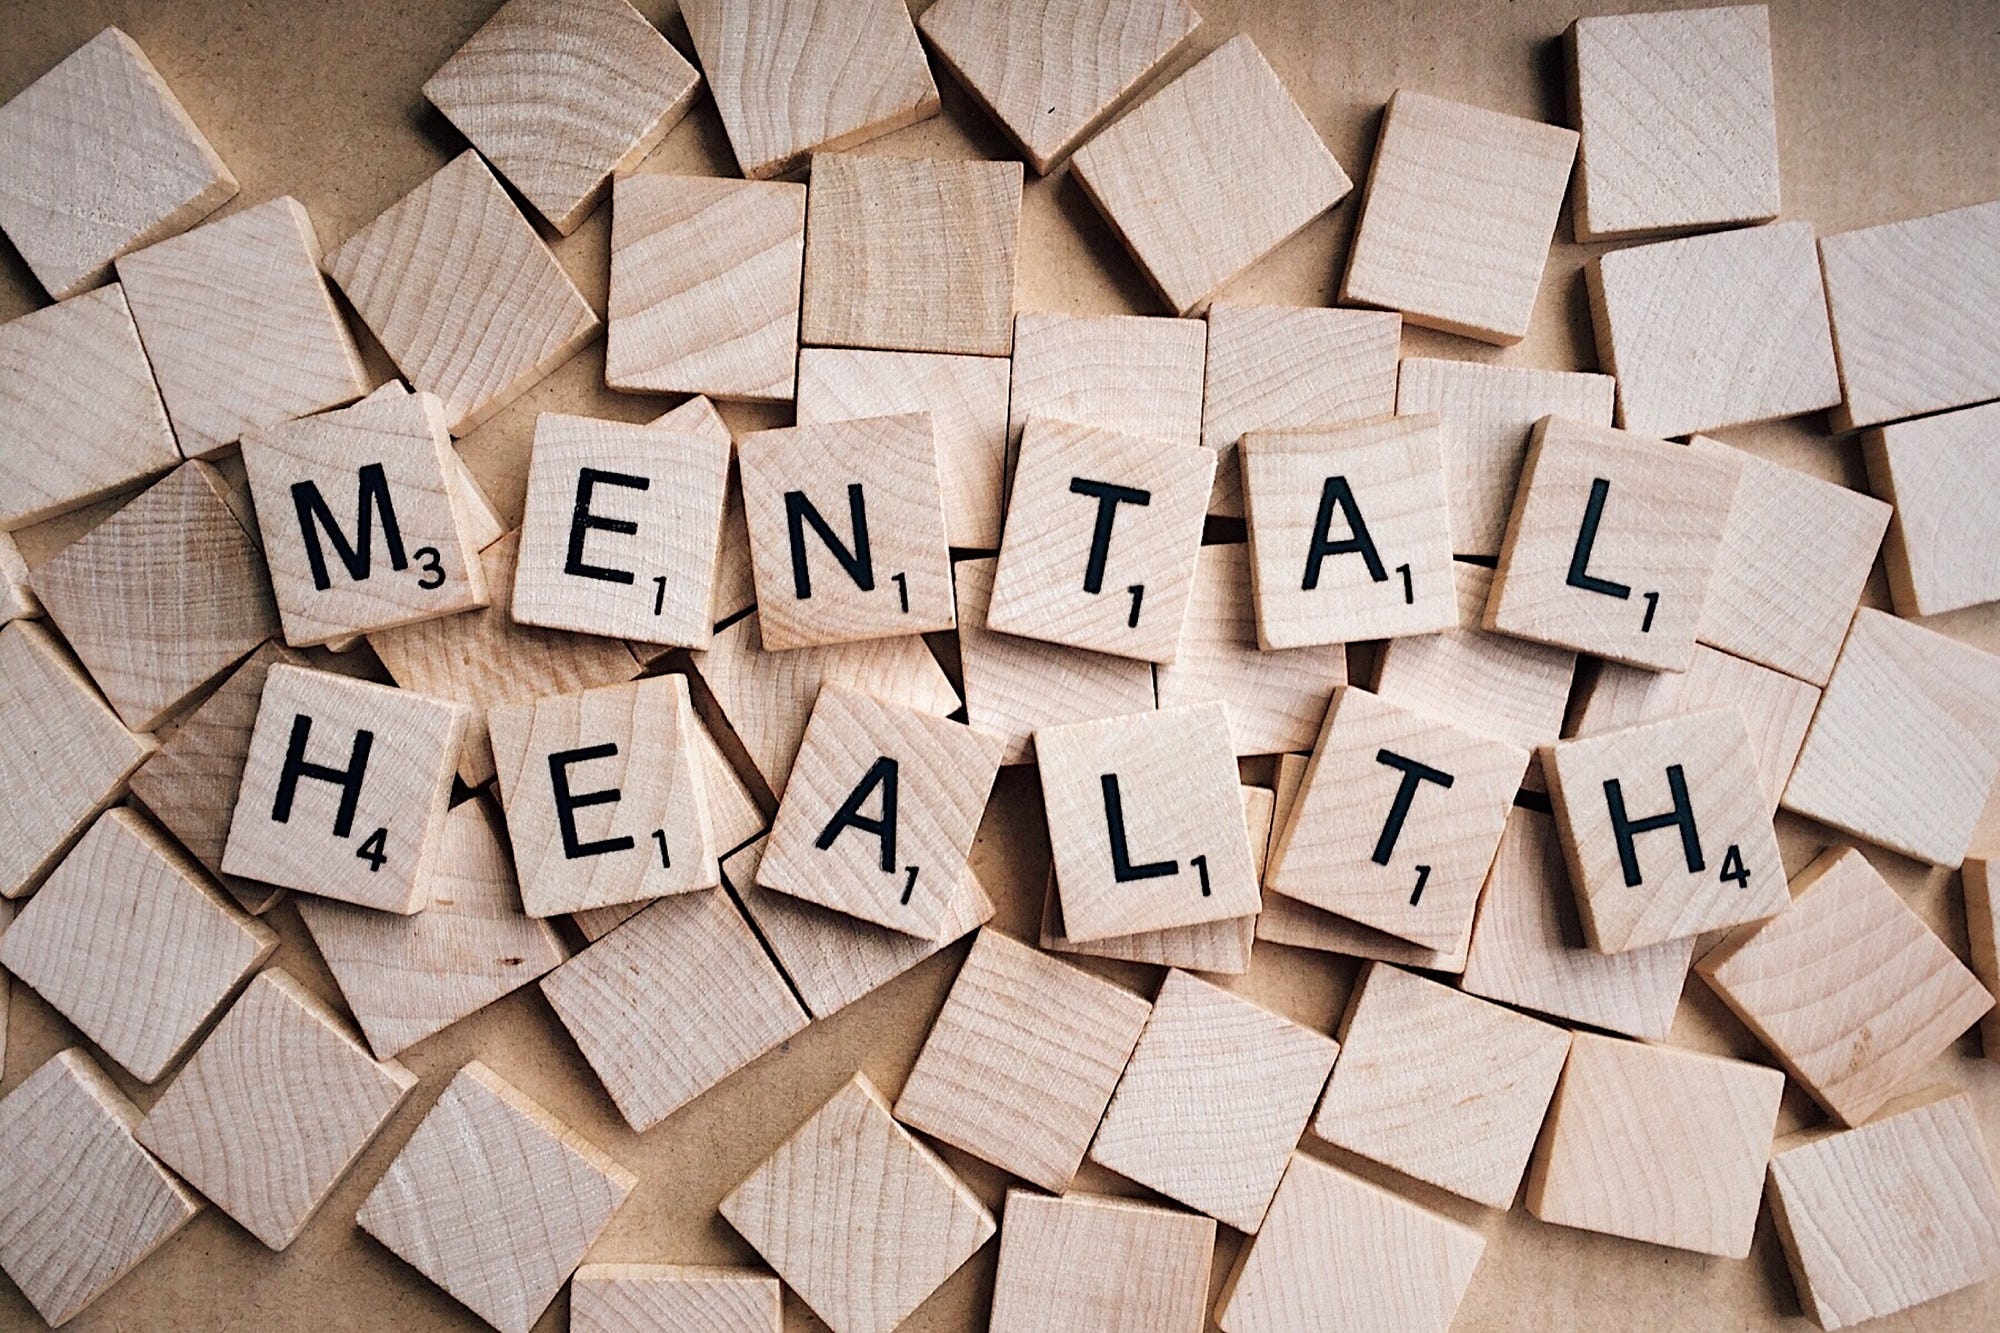 Mental Health spelled out in Scrabble letters